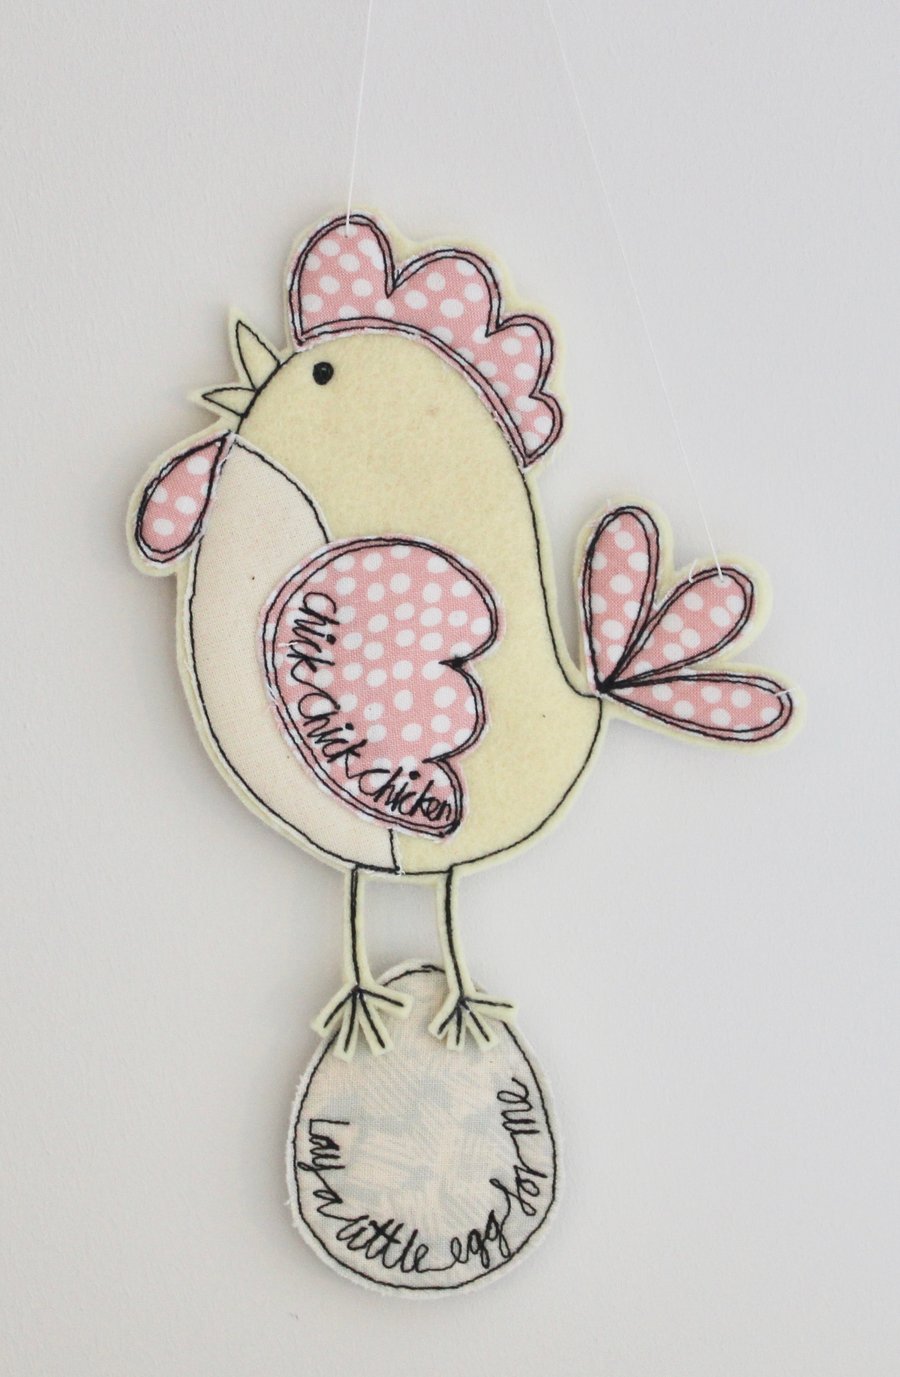 'Chick Chick Chicken, Lay a Little Egg for Me' - Hanging Decoration